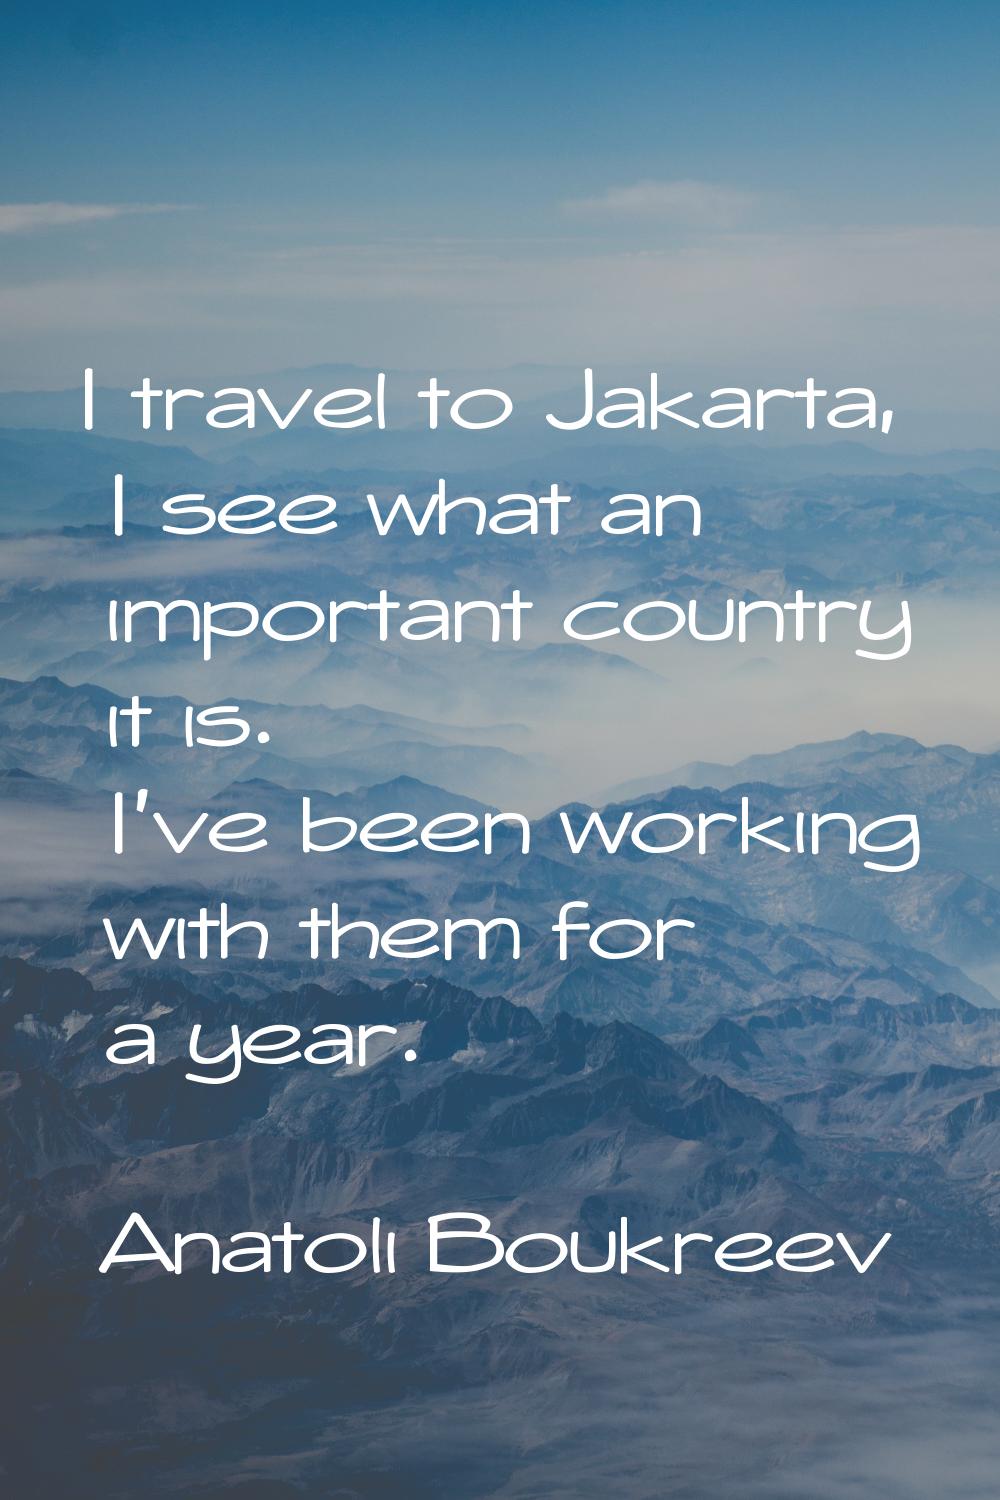 I travel to Jakarta, I see what an important country it is. I've been working with them for a year.